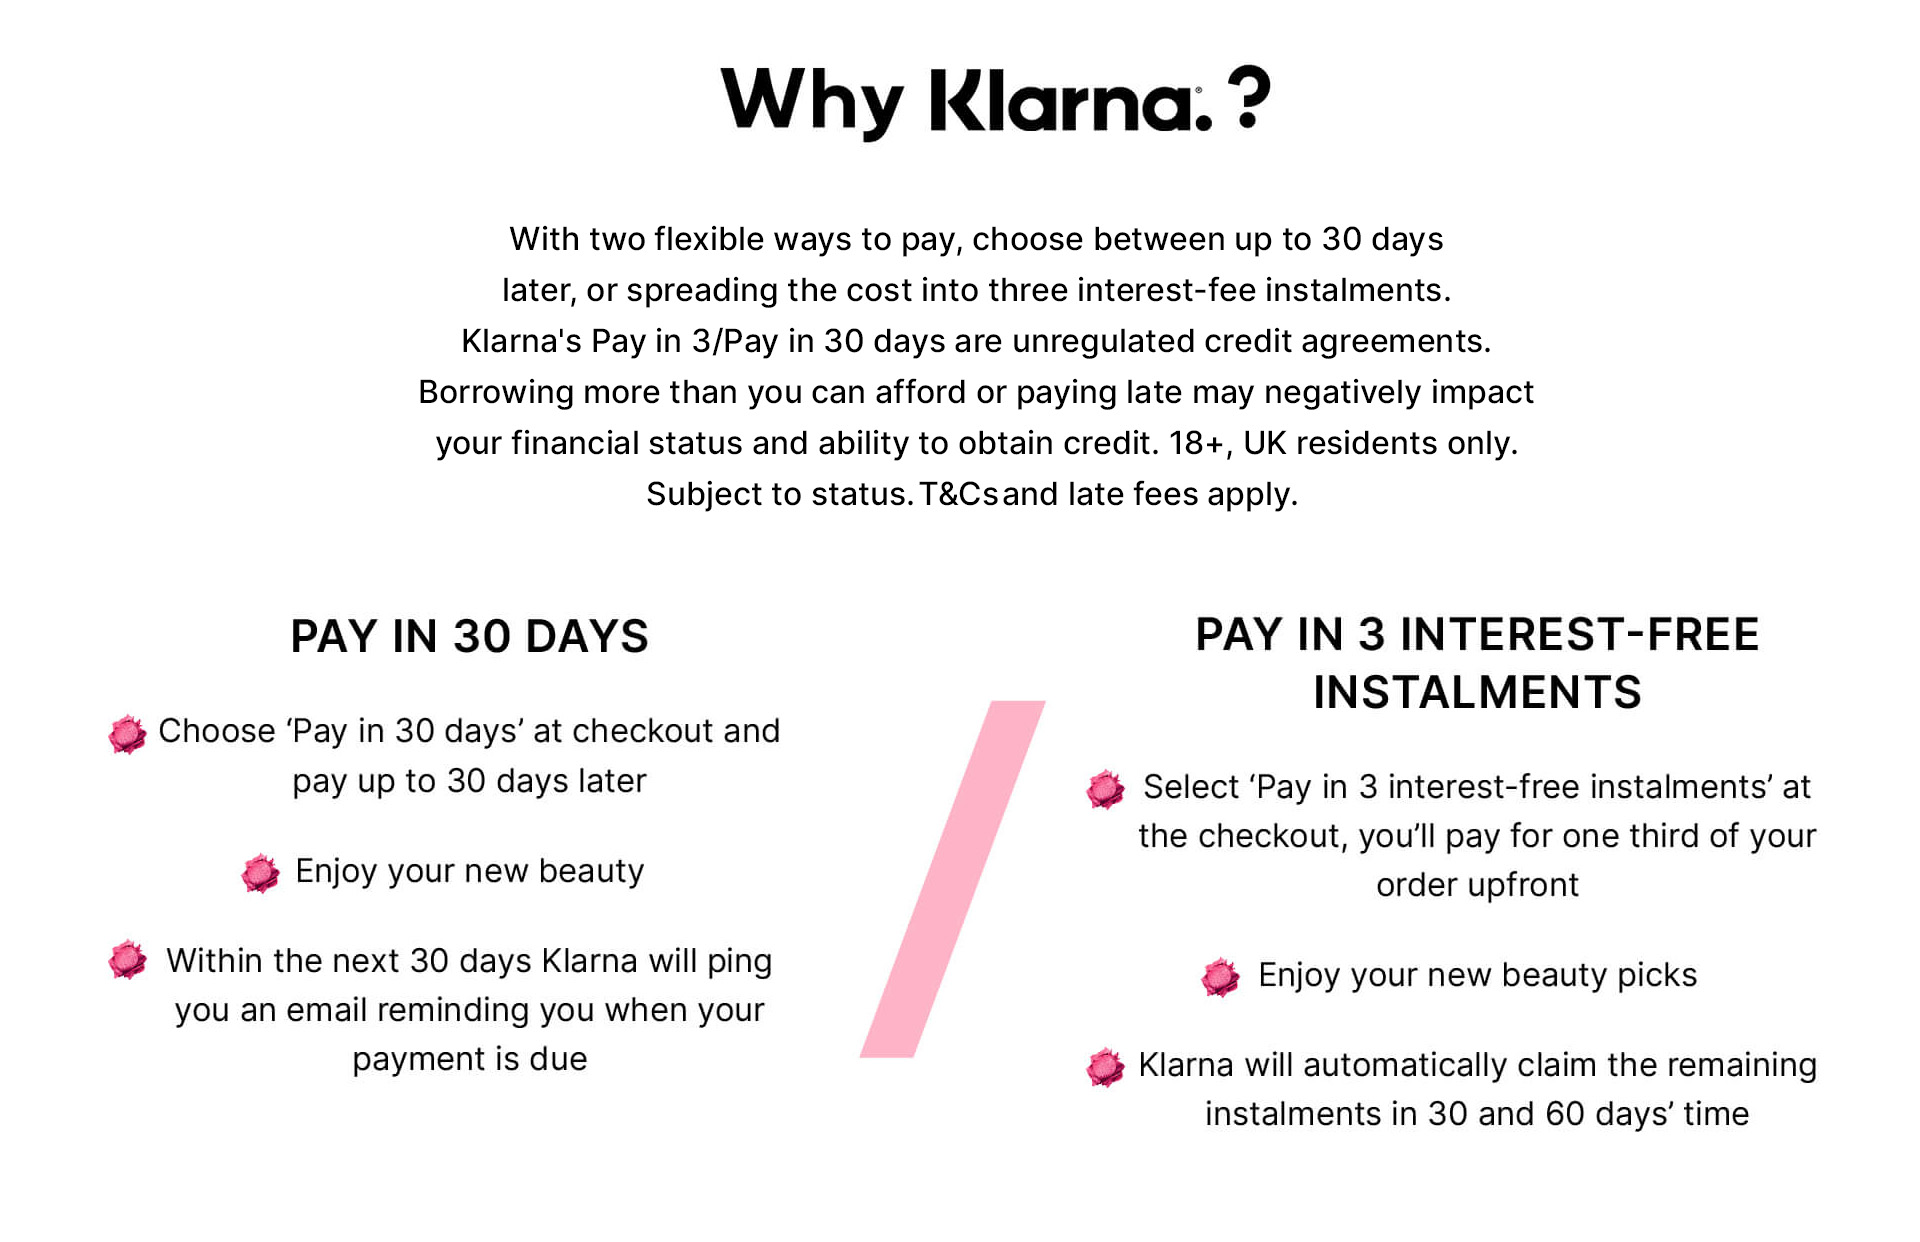 why klarna? with 2 ways to help take the sting out of shopping, choose between postponing payment by 30 days, or spreading the cost to help make those essential investments a lot less financially 'ouchy'. Pay later, beauty won't wait. Pay nothing, choose 'pay later' at checkout and you'll pay in 30 days' time. Enjoy your new beauty. Within the next 30 days Klarna will ping you an email reminding you when your payment is due. Pay later in 3: big thrills, small bills. Select 'pay later in 3' at the checkout, you'll pay for one third of your order upfront. Enjoy your haul. Klarna will claim the remaining instalments in 30 and 60 days' time.